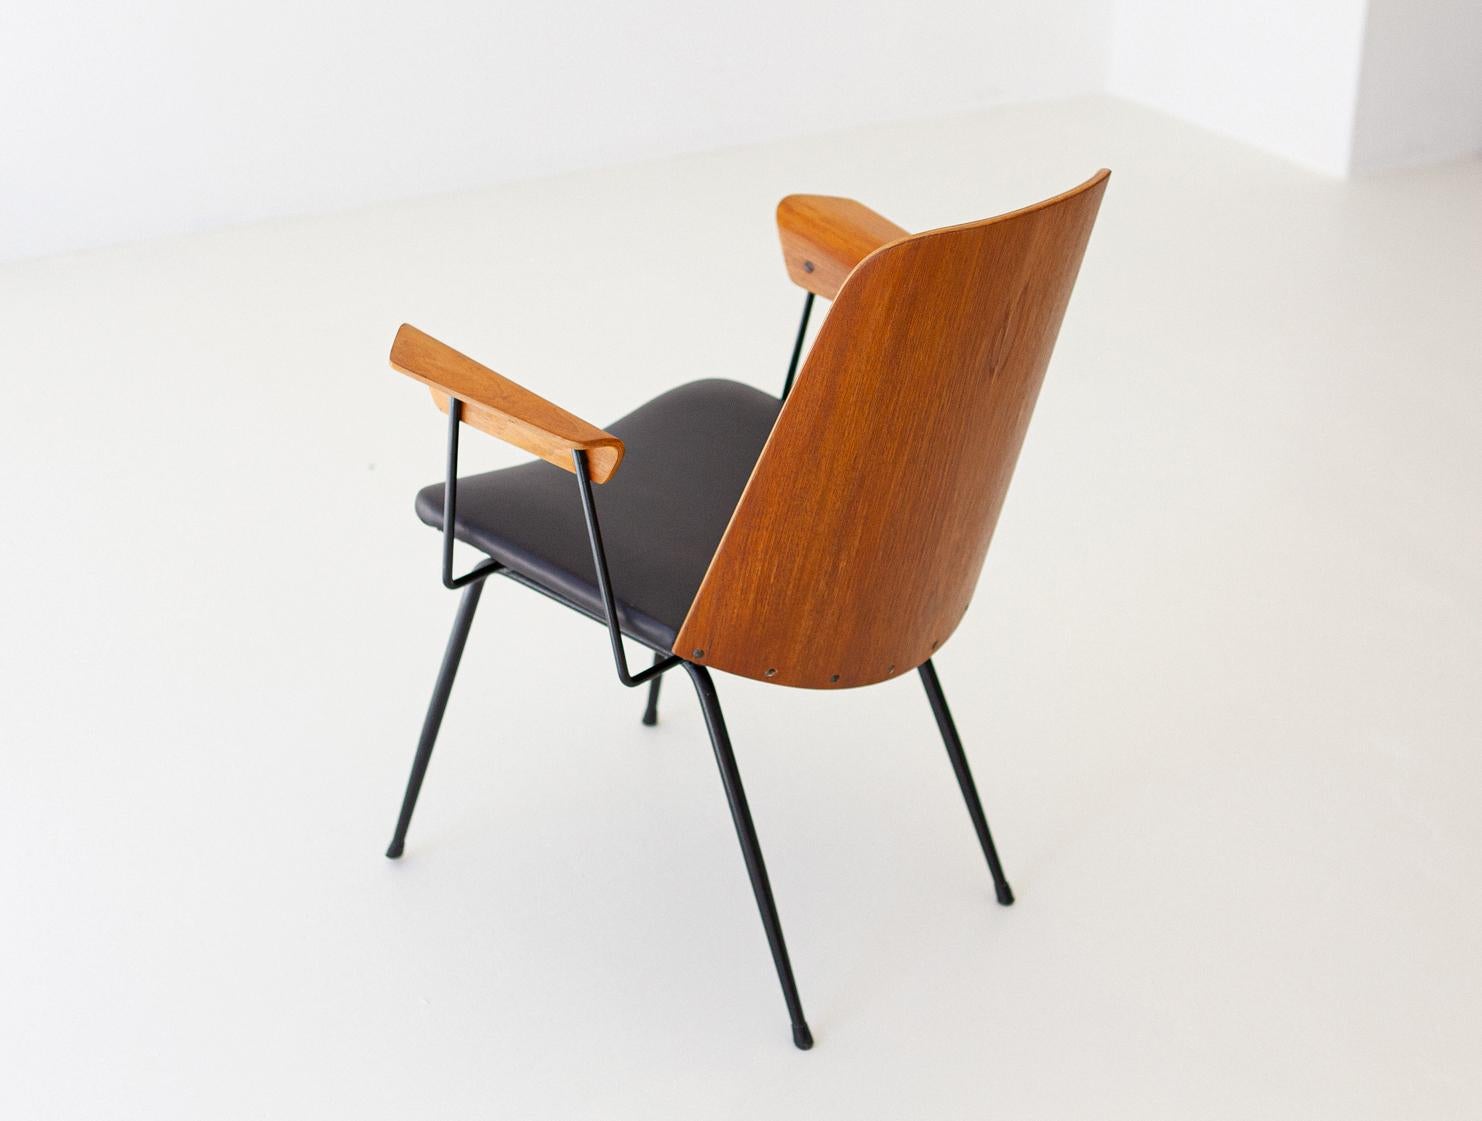 Modern easy chair  with armrests,
Model DU22 ,  designed by Gastone Rinaldi and produced by Rima during the 1950s.

Also usable as desk chair.

Completely restored:
New black natural leather and new padding 
New teak veneer on the curved backrests